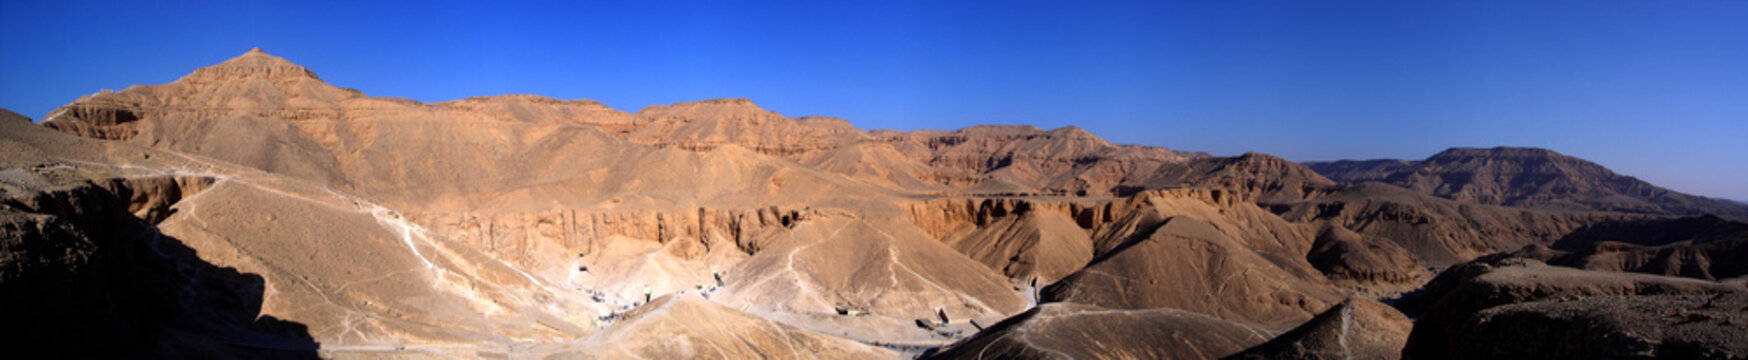 Stitched panorama of the Valley of the Kings - Luxor - Egypt